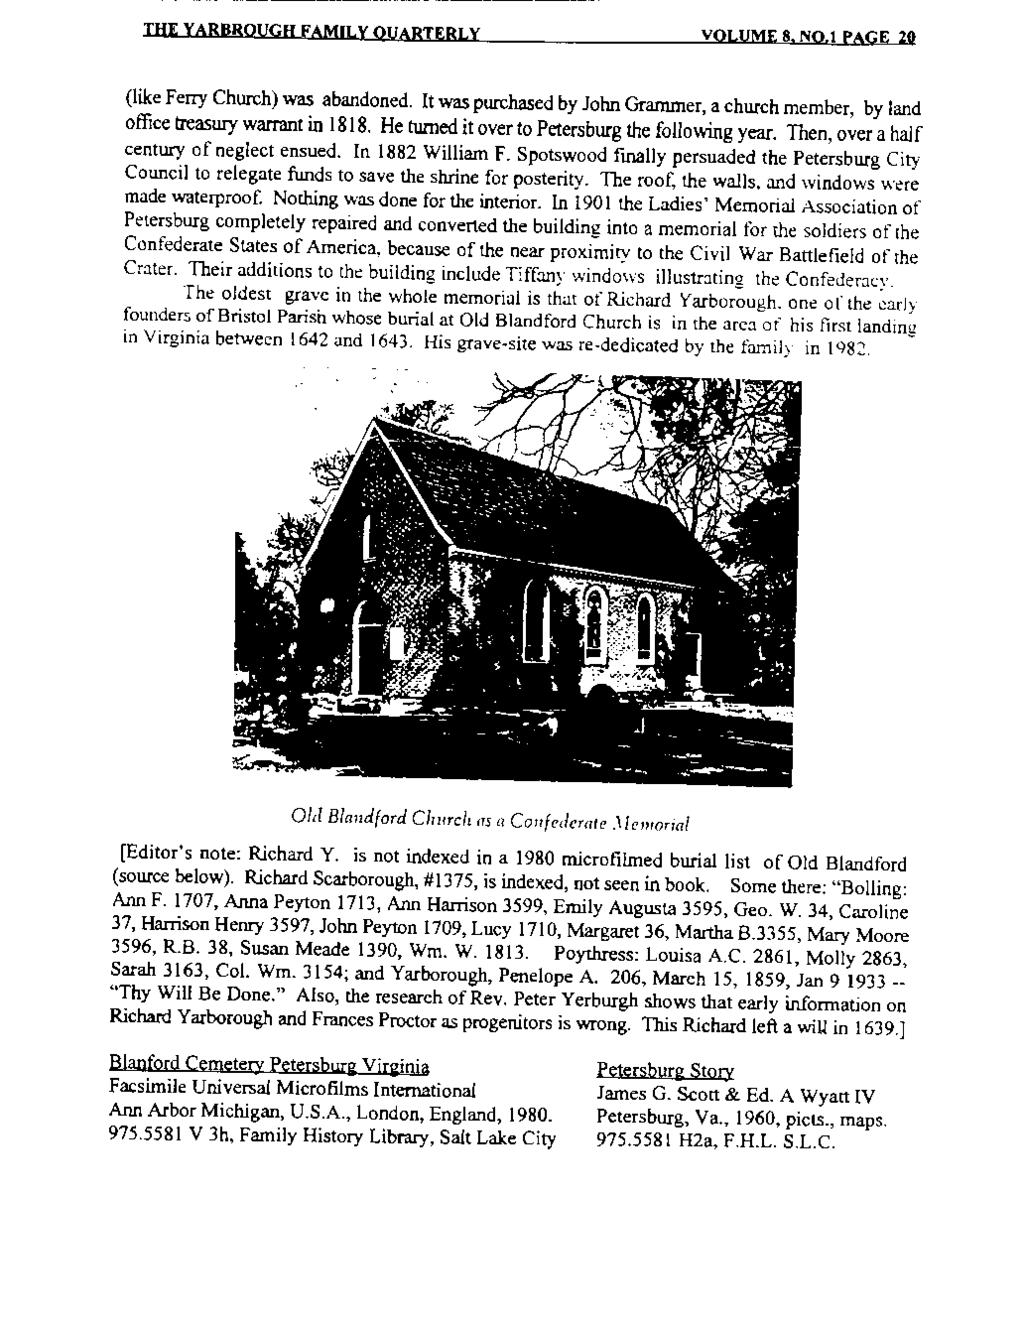 THE YARBROUGH FAMILY QUARTERLY VOLUME 8. N0.1 PAGE 20 (like Ferry Church) was abandoned. It was purchased by John Grammer, a church member, by land office treasury warrant in 1818.